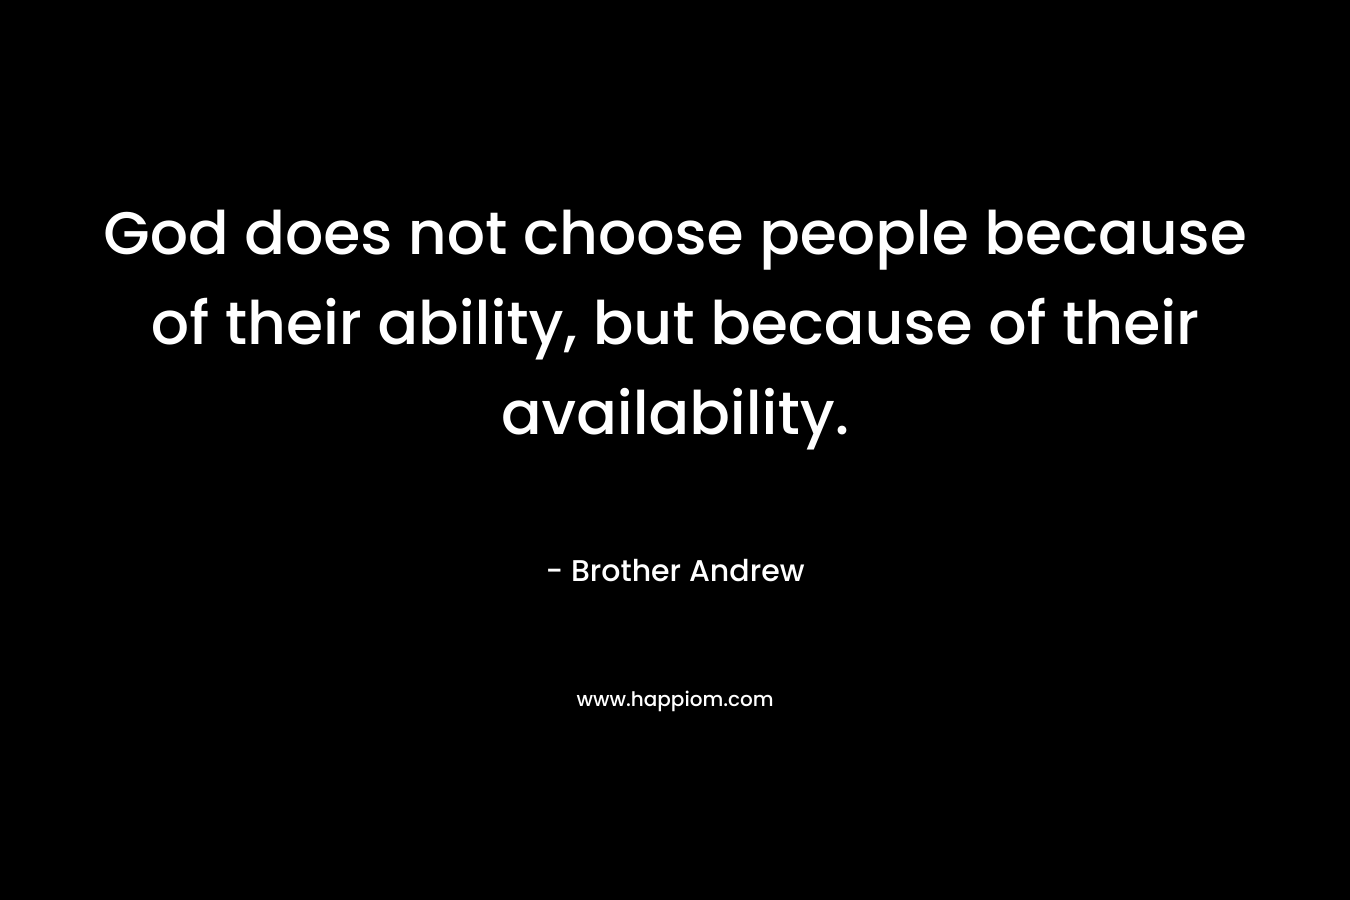 God does not choose people because of their ability, but because of their availability.